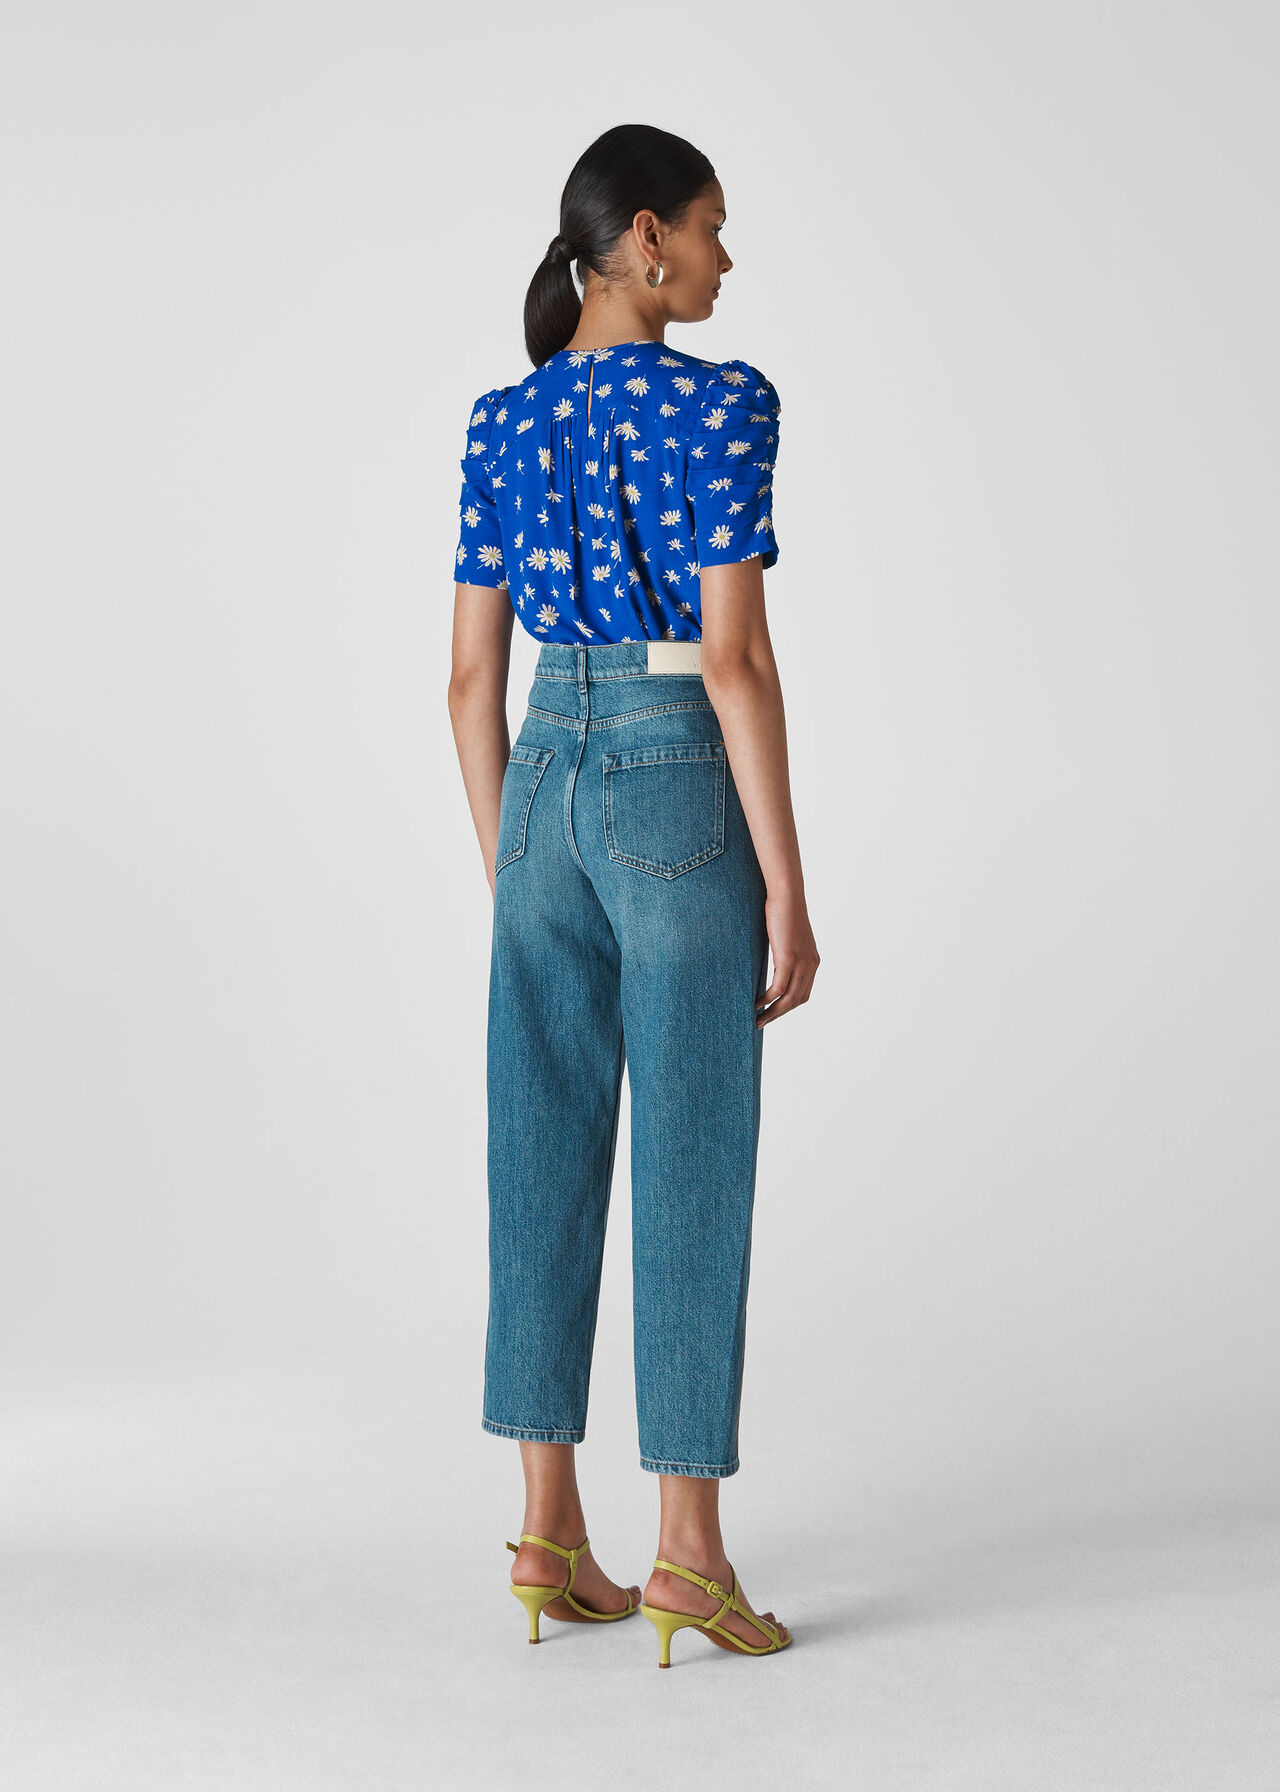 Blue/Multi Scattered Daisy Print Shell Top | WHISTLES